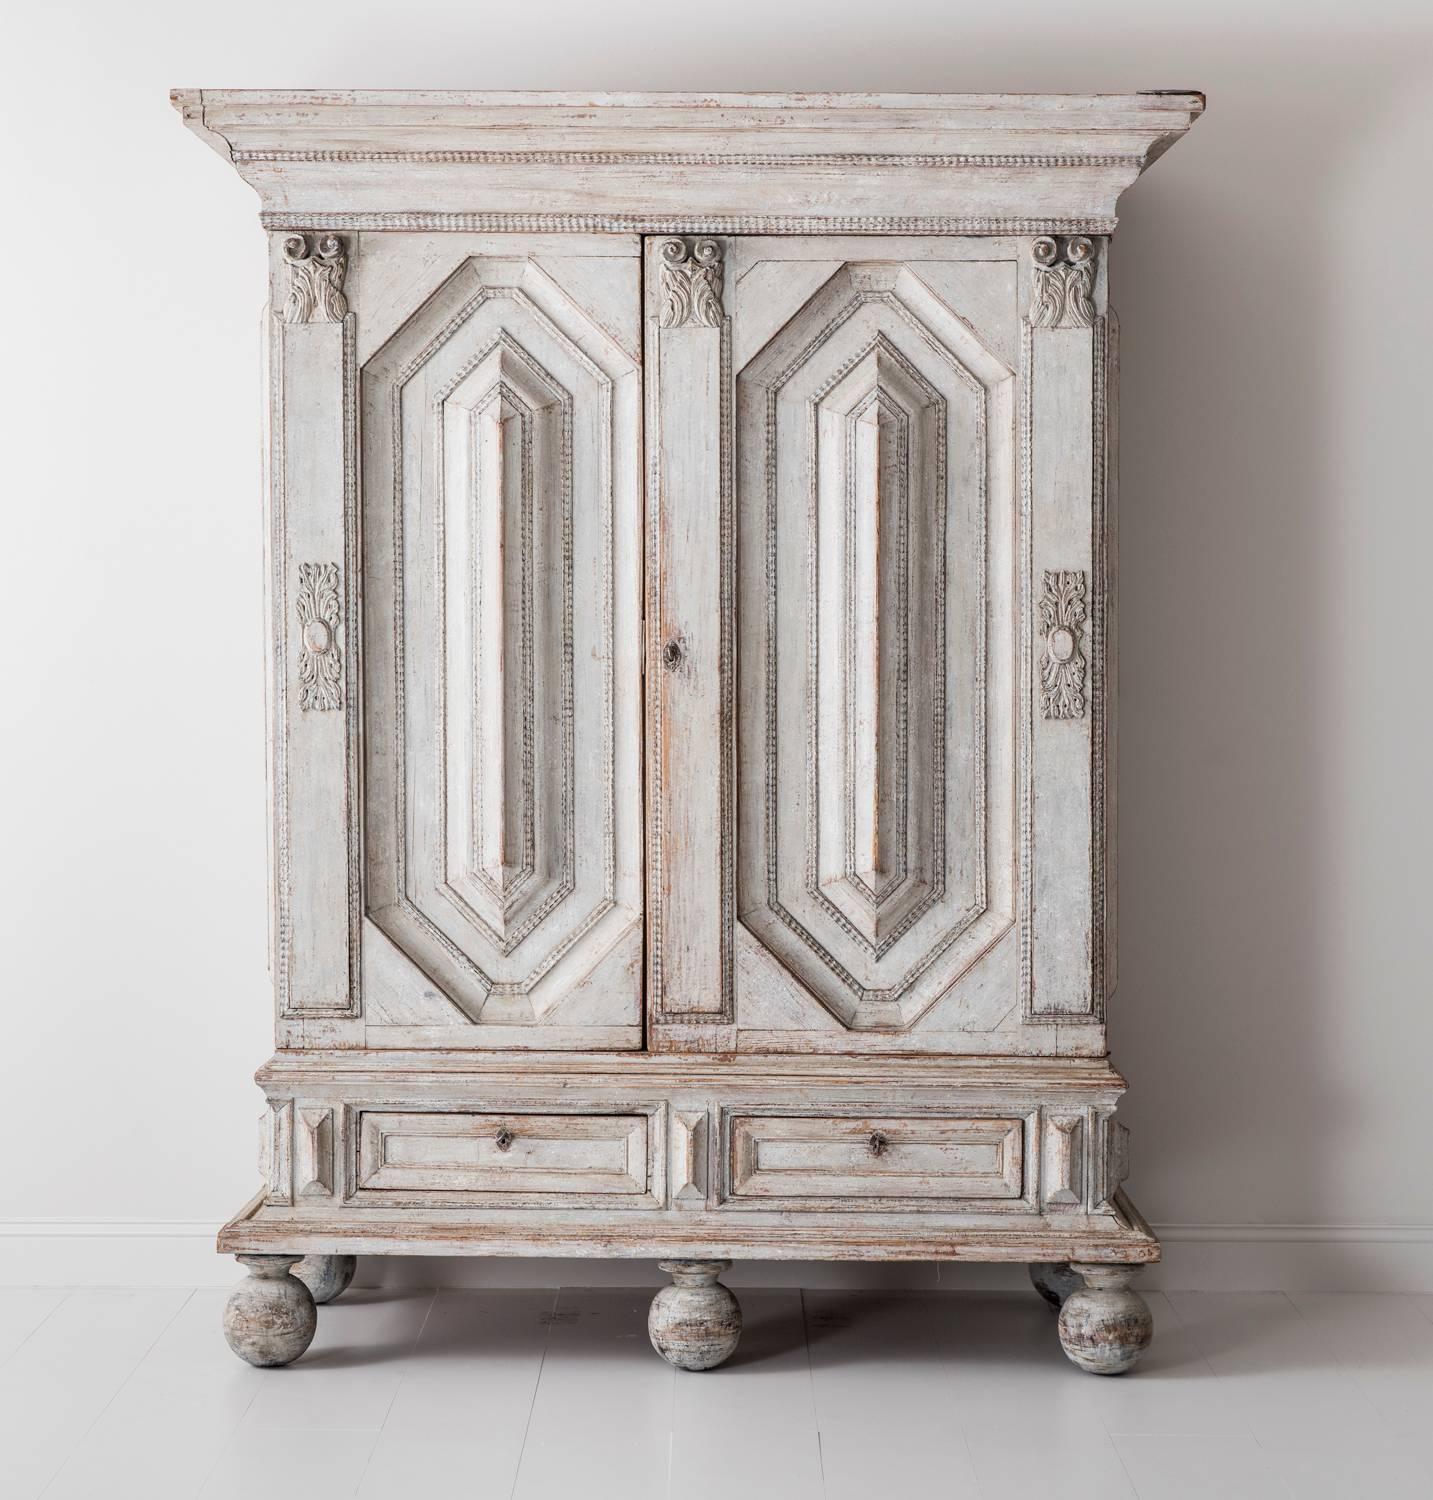 A monumental and richly carved Swedish armoire or linen press cabinet from the Baroque period with handsome ball feet, circa 1750. The large doors sit above a pair of drawers and open to reveal four internal shelves. This is a rare piece with plenty